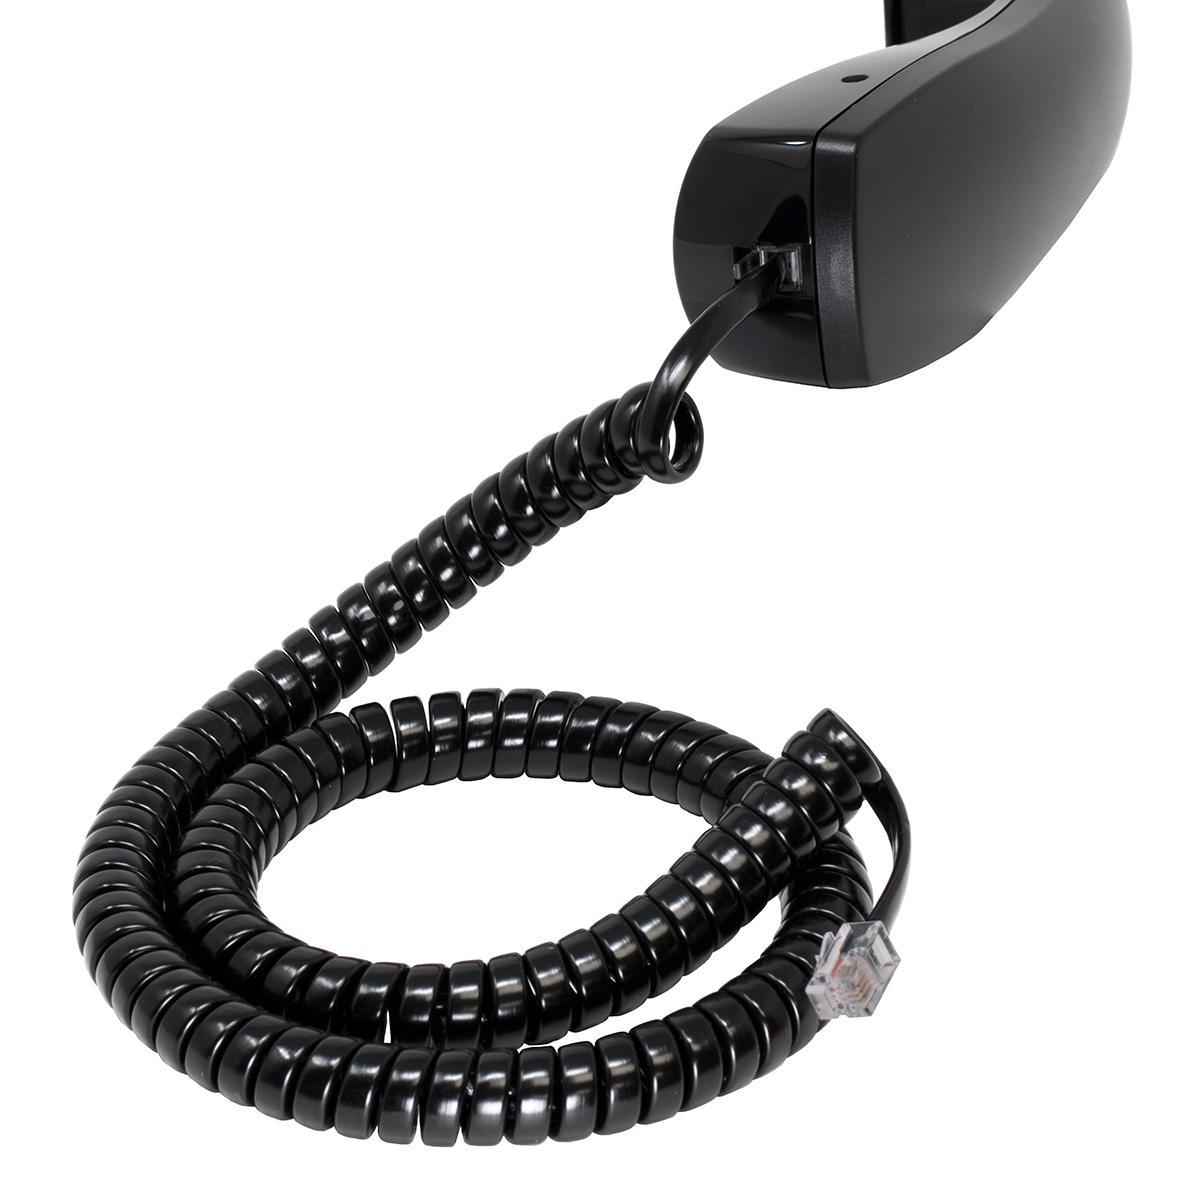 12' Black Coiled Handset Cord (Handset View)